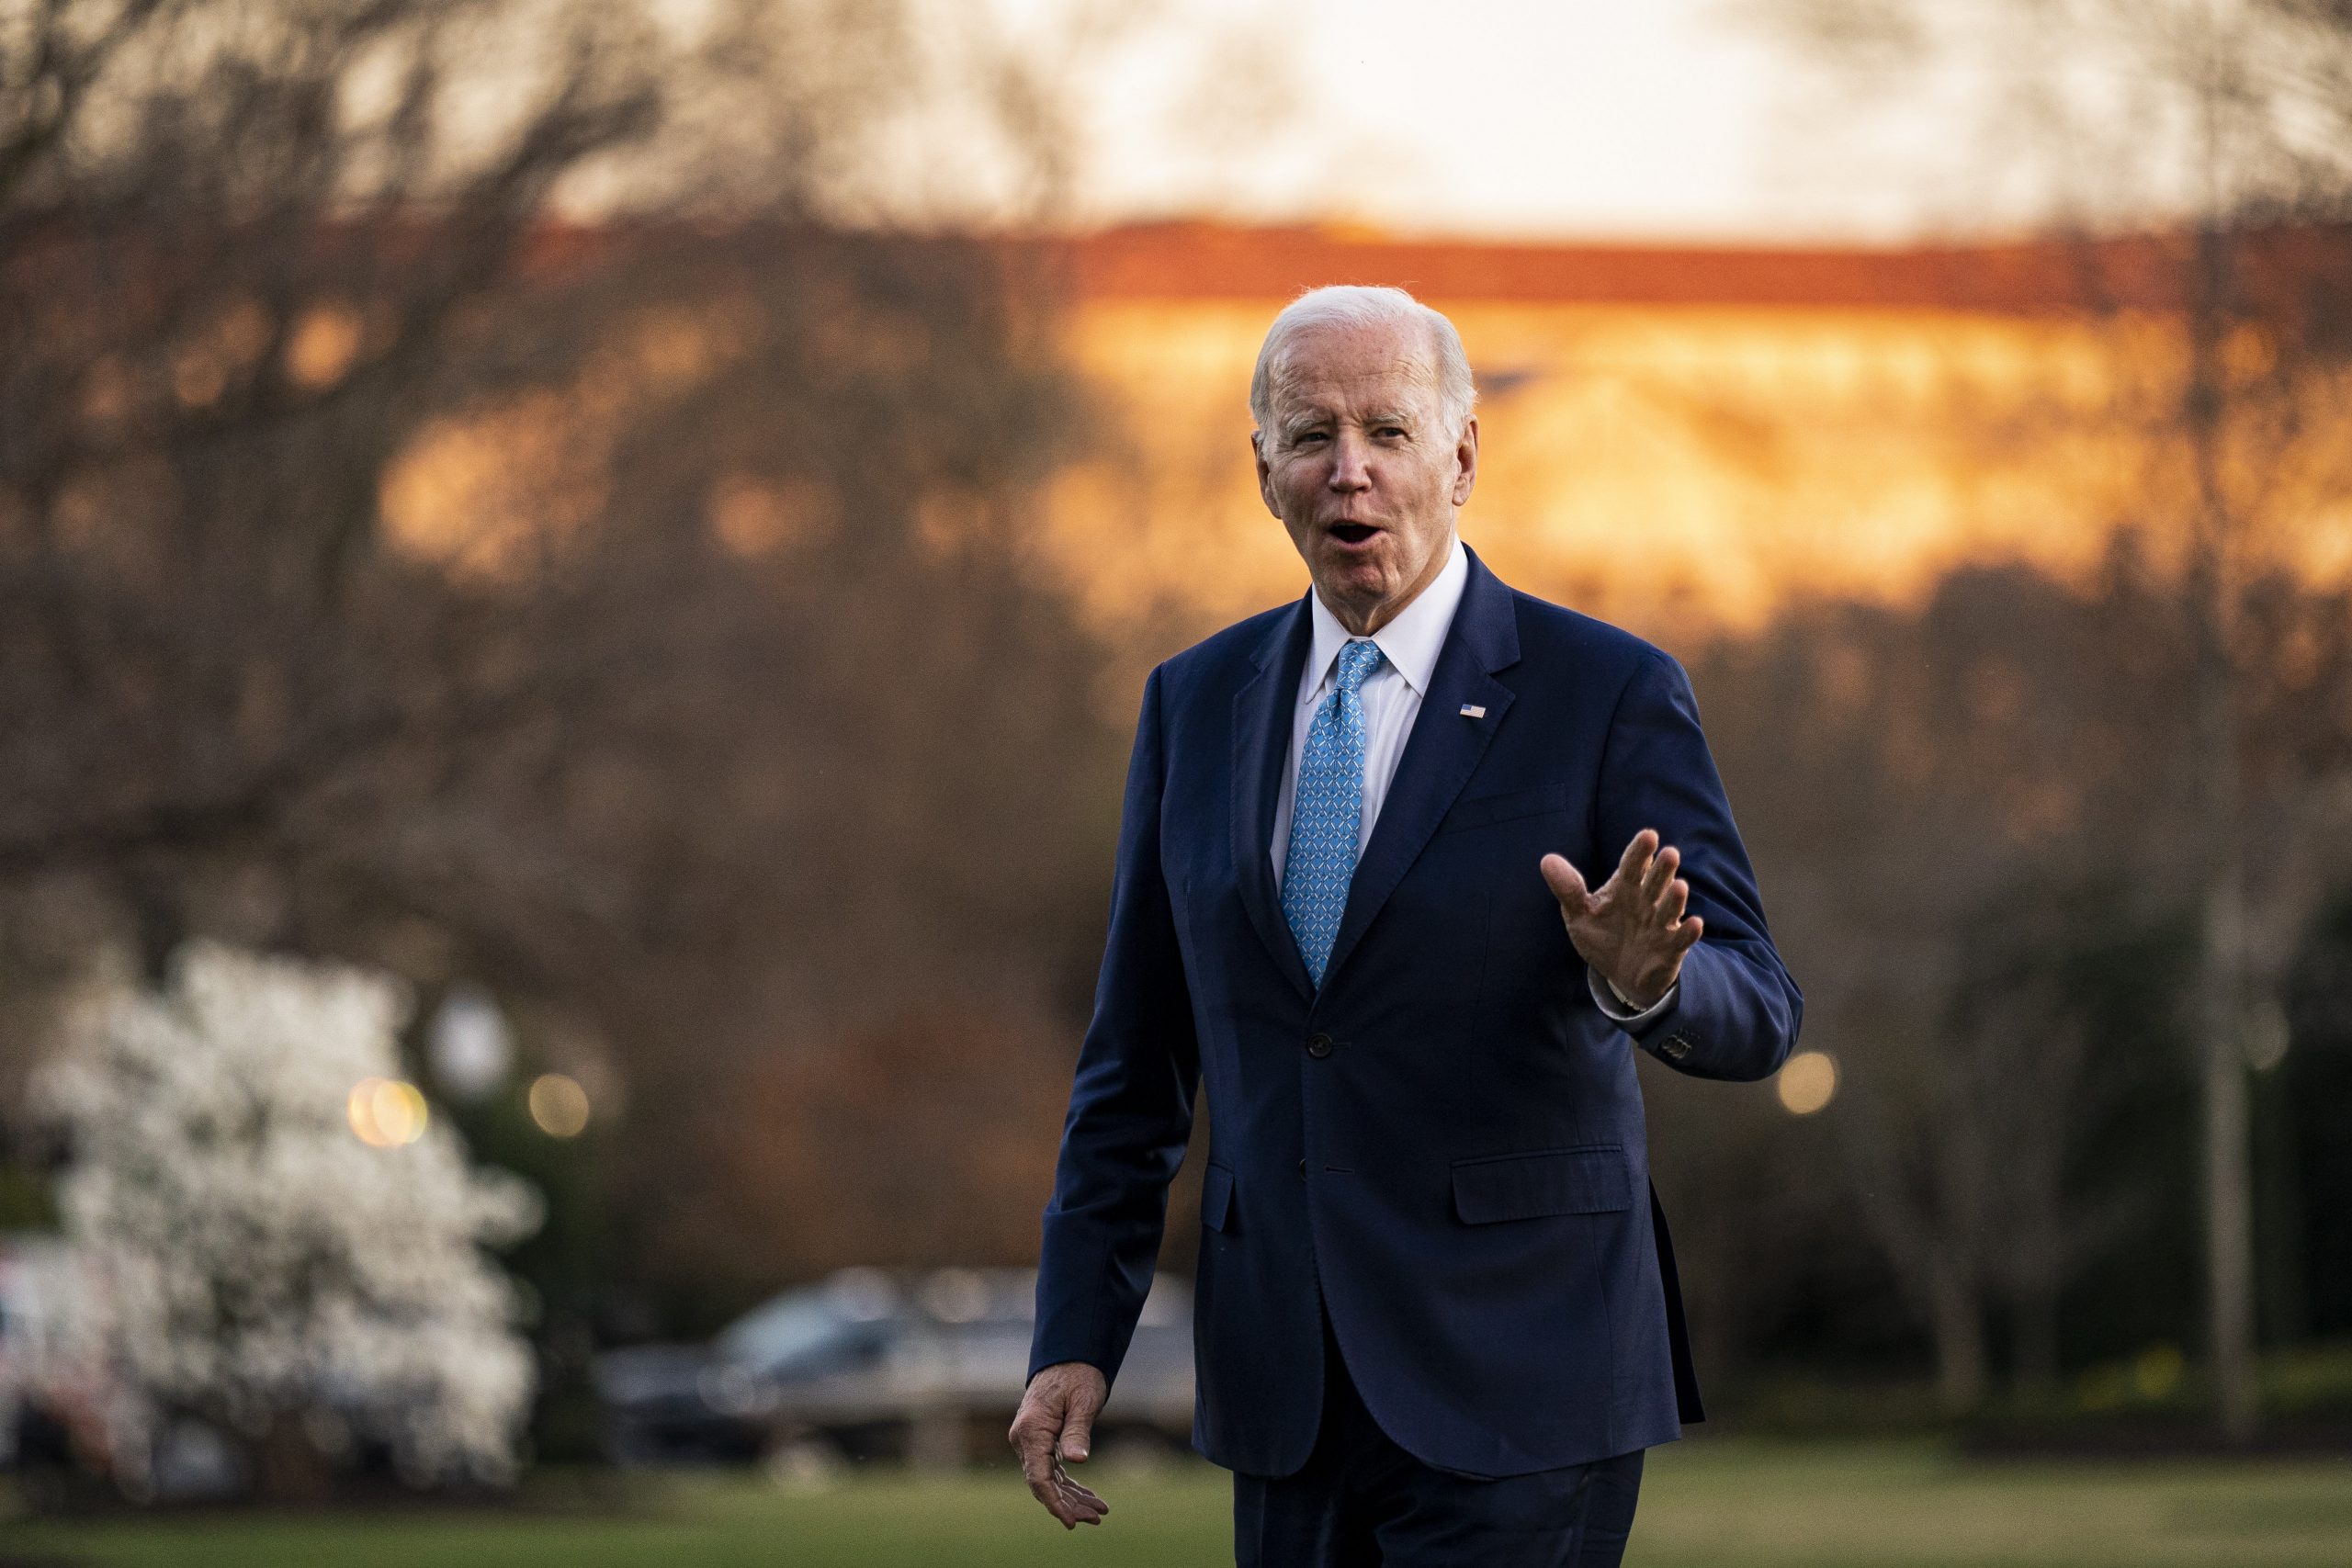 epa10496084 US President Joe Biden walks on the South Lawn of the White House after arriving on Marine One in Washington, DC, USA, 28 February 2023. President Biden discussed his plan to protect American access to affordable health care in Virginia Beach.  EPA/Al Drago / POOL